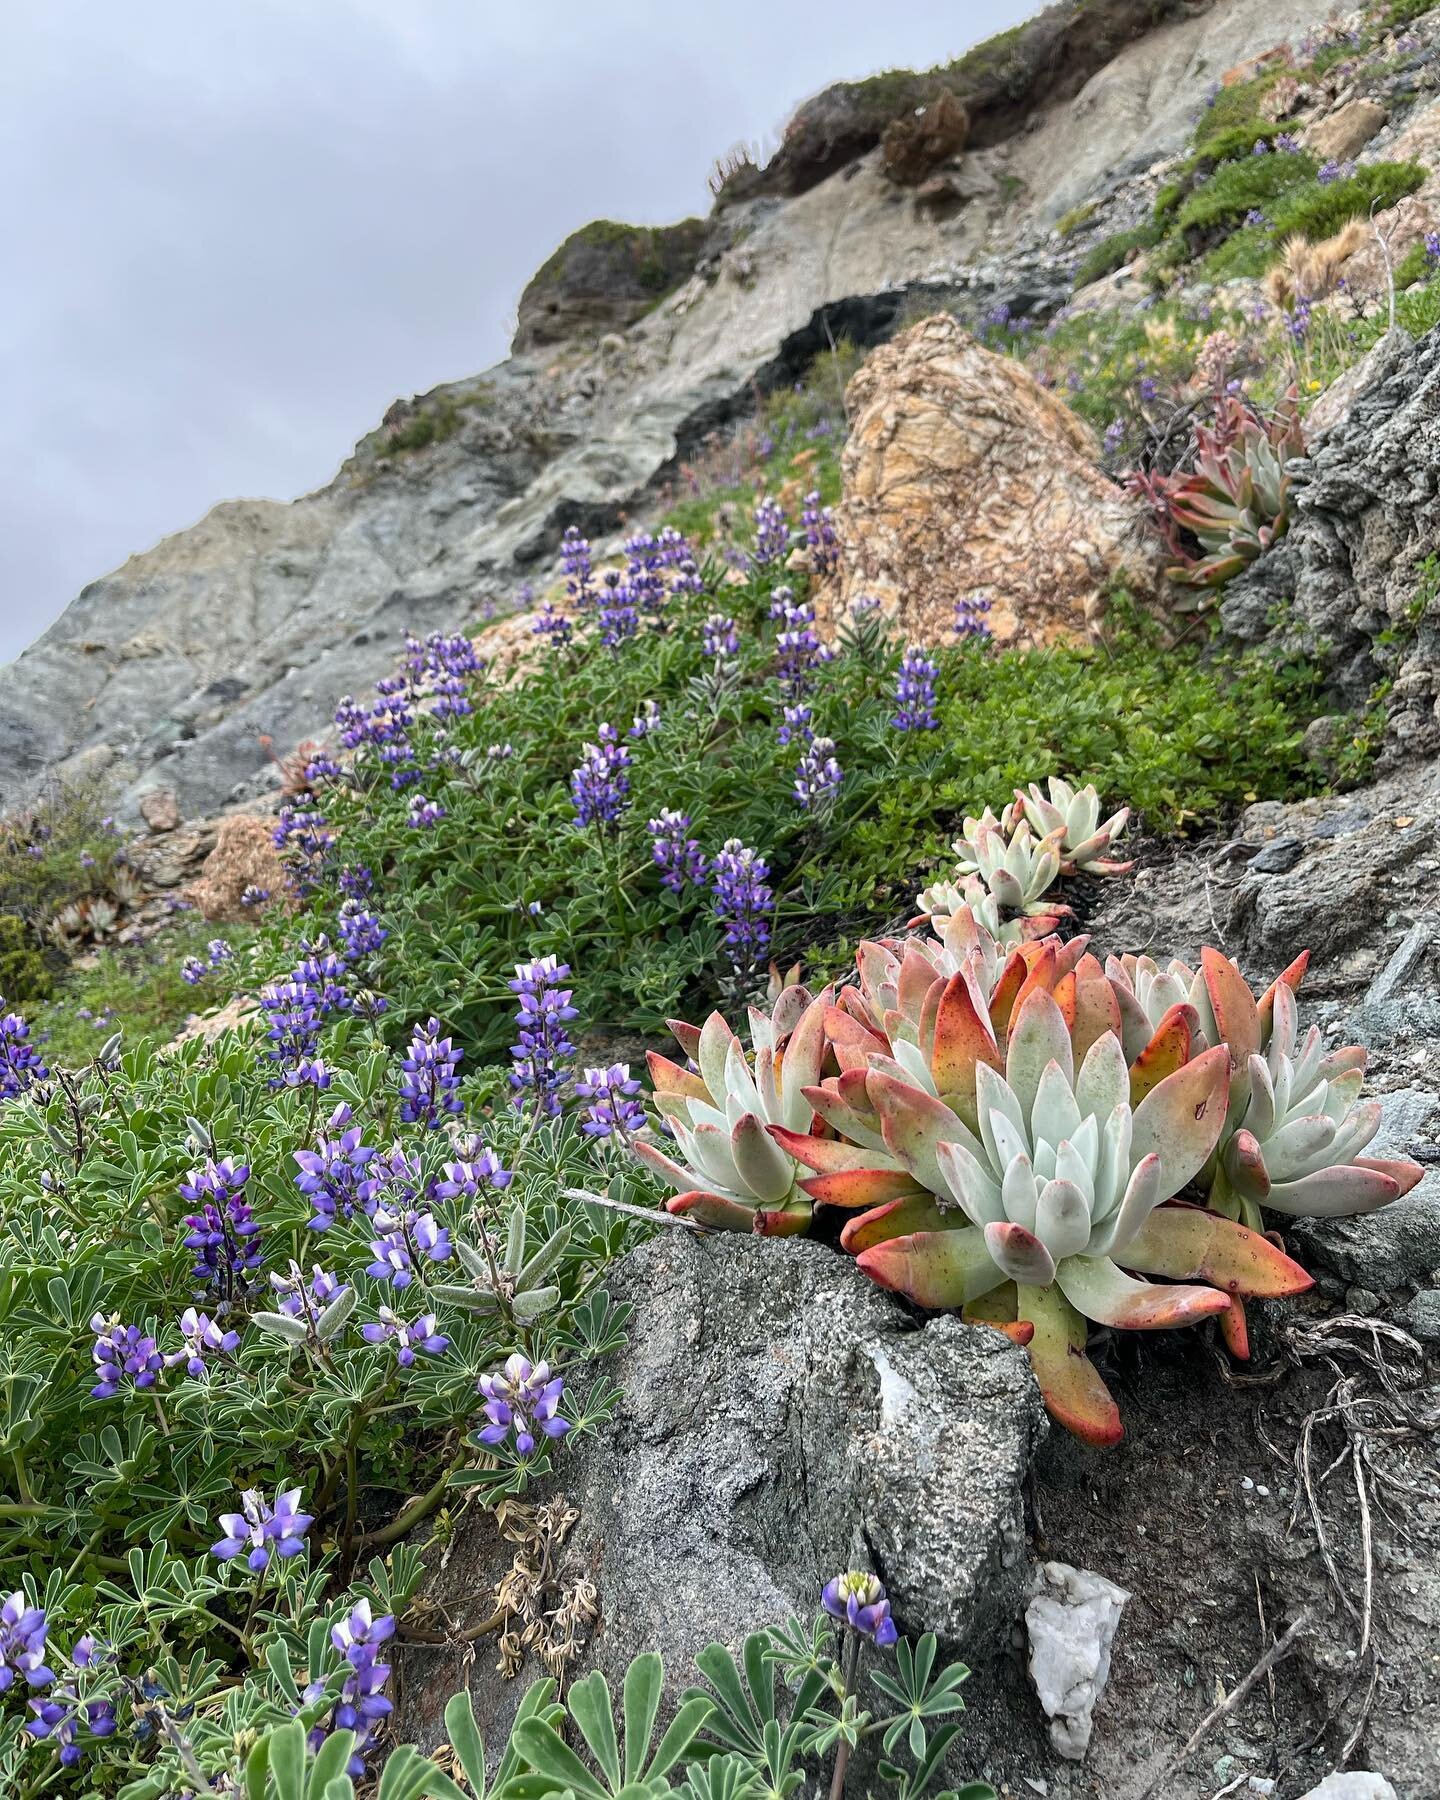 A trip to Pimu aka Santa Catalina Island replete with visits with some VIPs (Very Important PLANTS) from the Maritime Sage Scrub and coastal sage scrub plant communities, as well as many endemic plants found only on Catalina. I also got to spend time